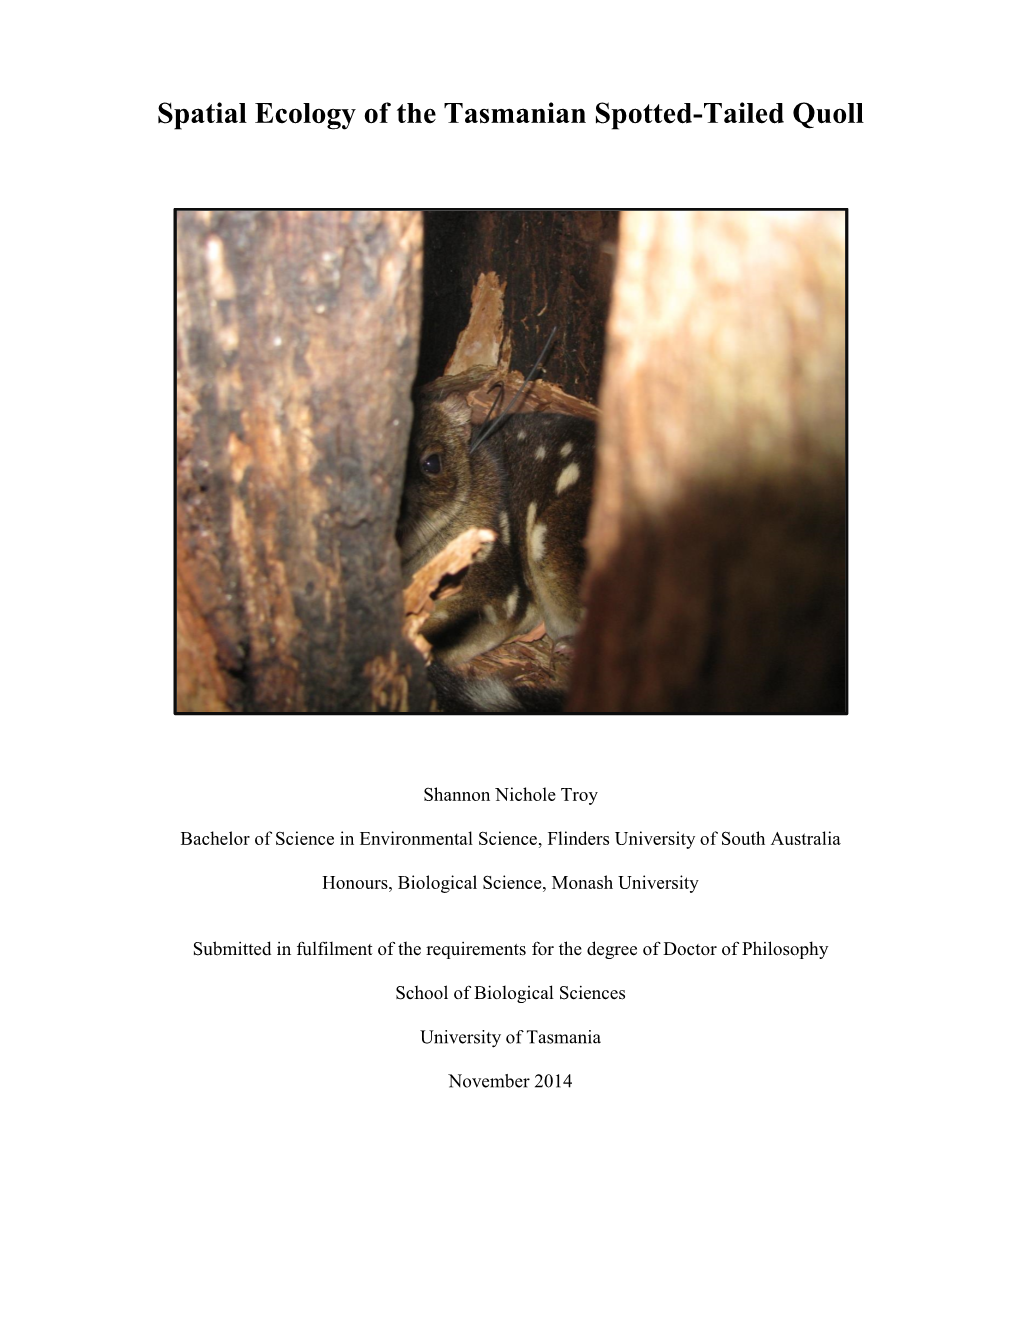 Spatial Ecology of the Tasmanian Spotted-Tailed Quoll